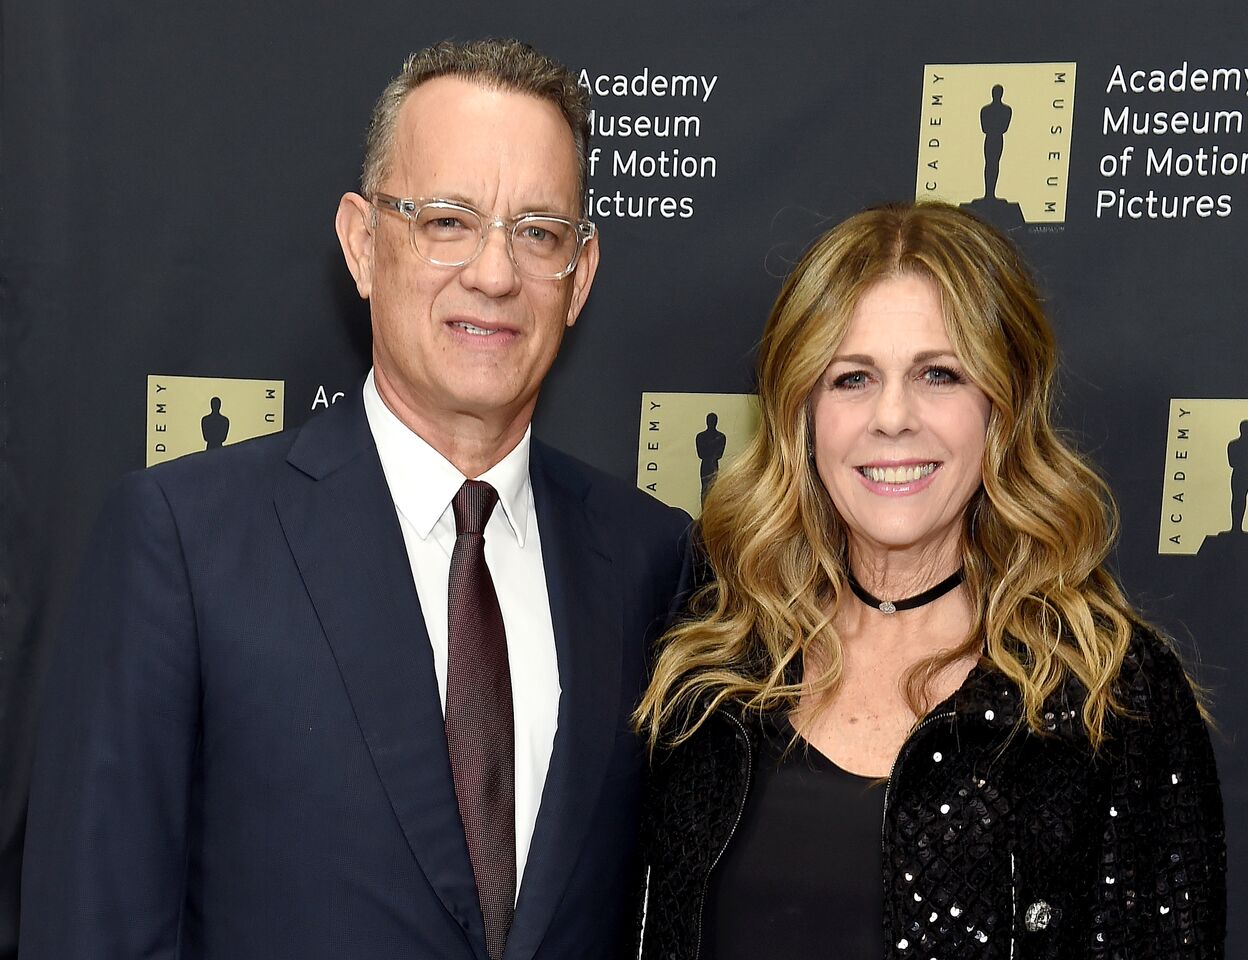 Tom Hanks and Rita Wilson attend The Academy Museum Of Motion Pictures Unveiling of the Fully Restored Saban Building. |Photo: Getty Images